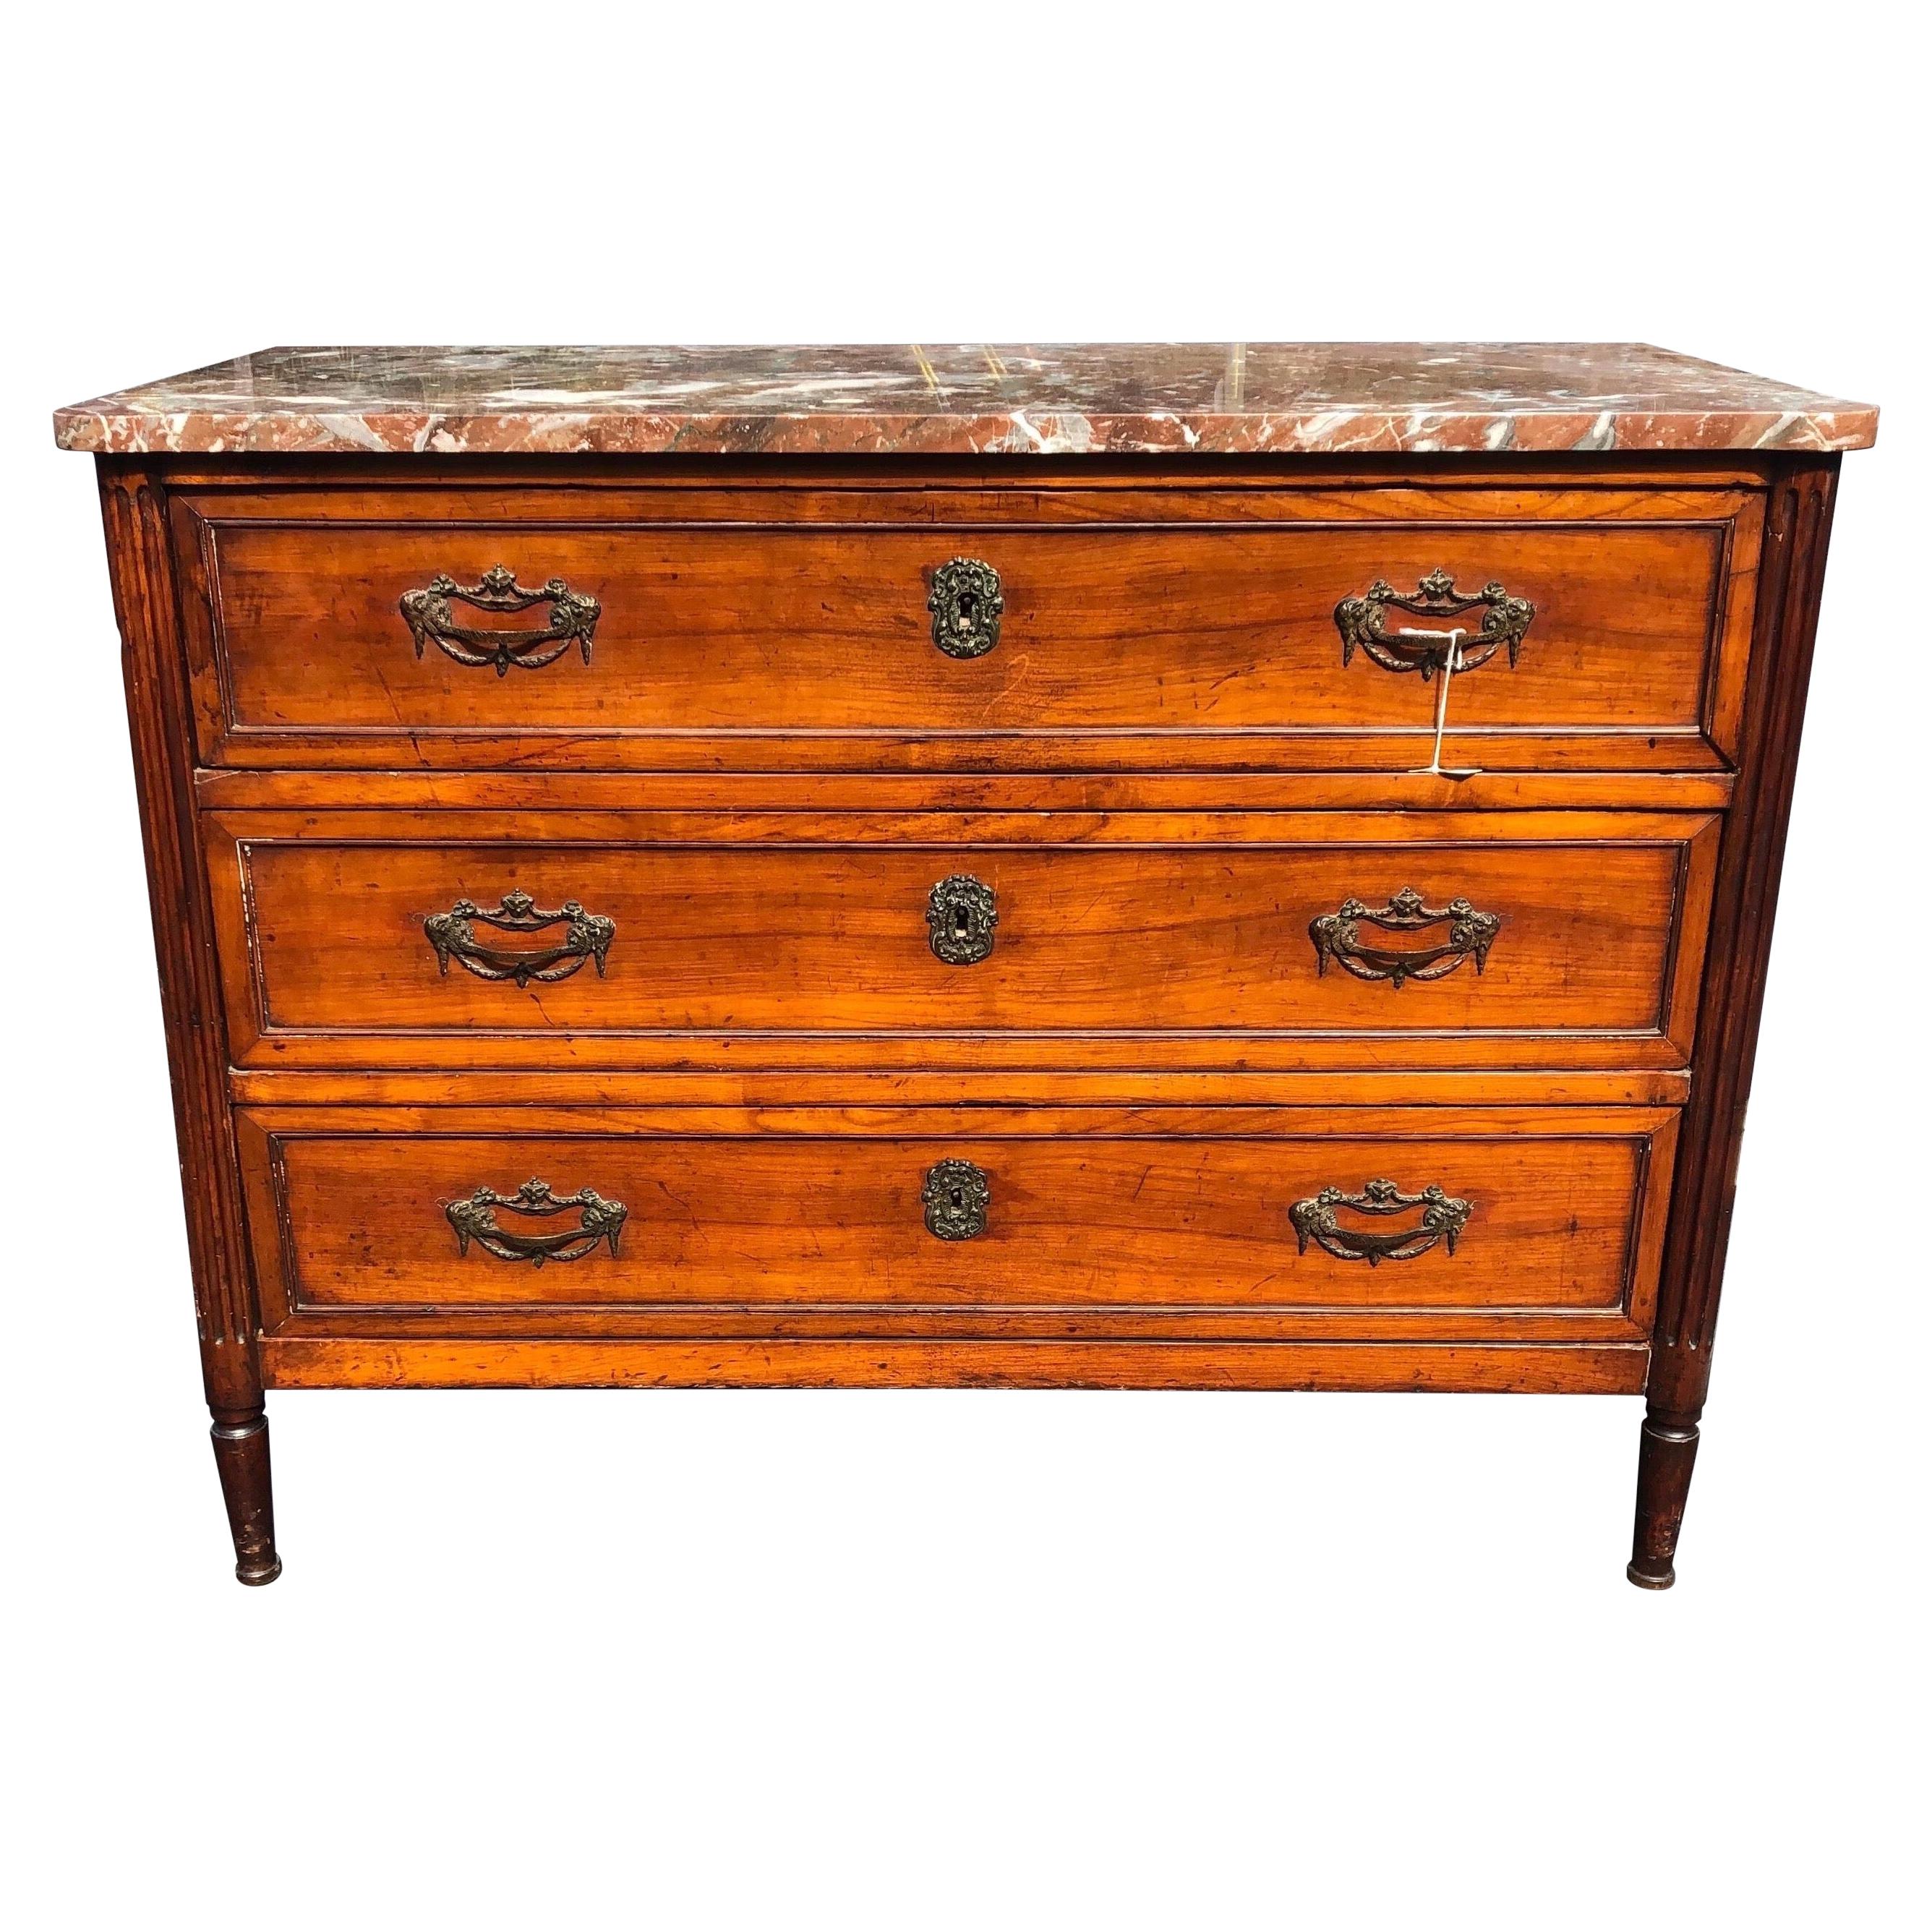 19th Century French 3 Drawer Marble Top Fruitwood Commode